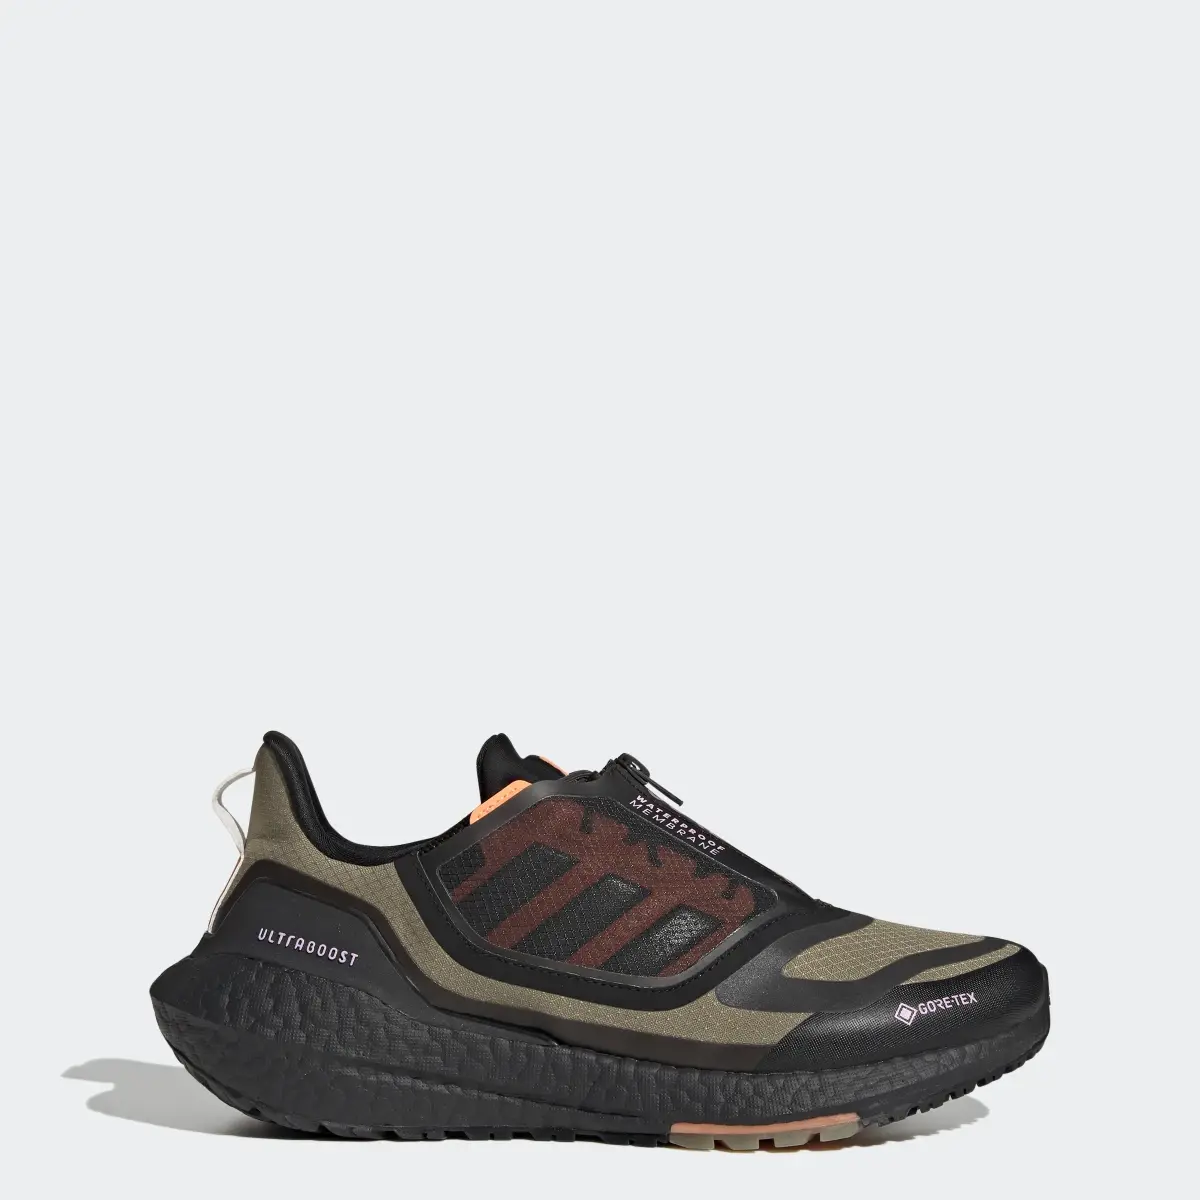 Adidas Ultraboost 22 GORE-TEX Shoes. 1